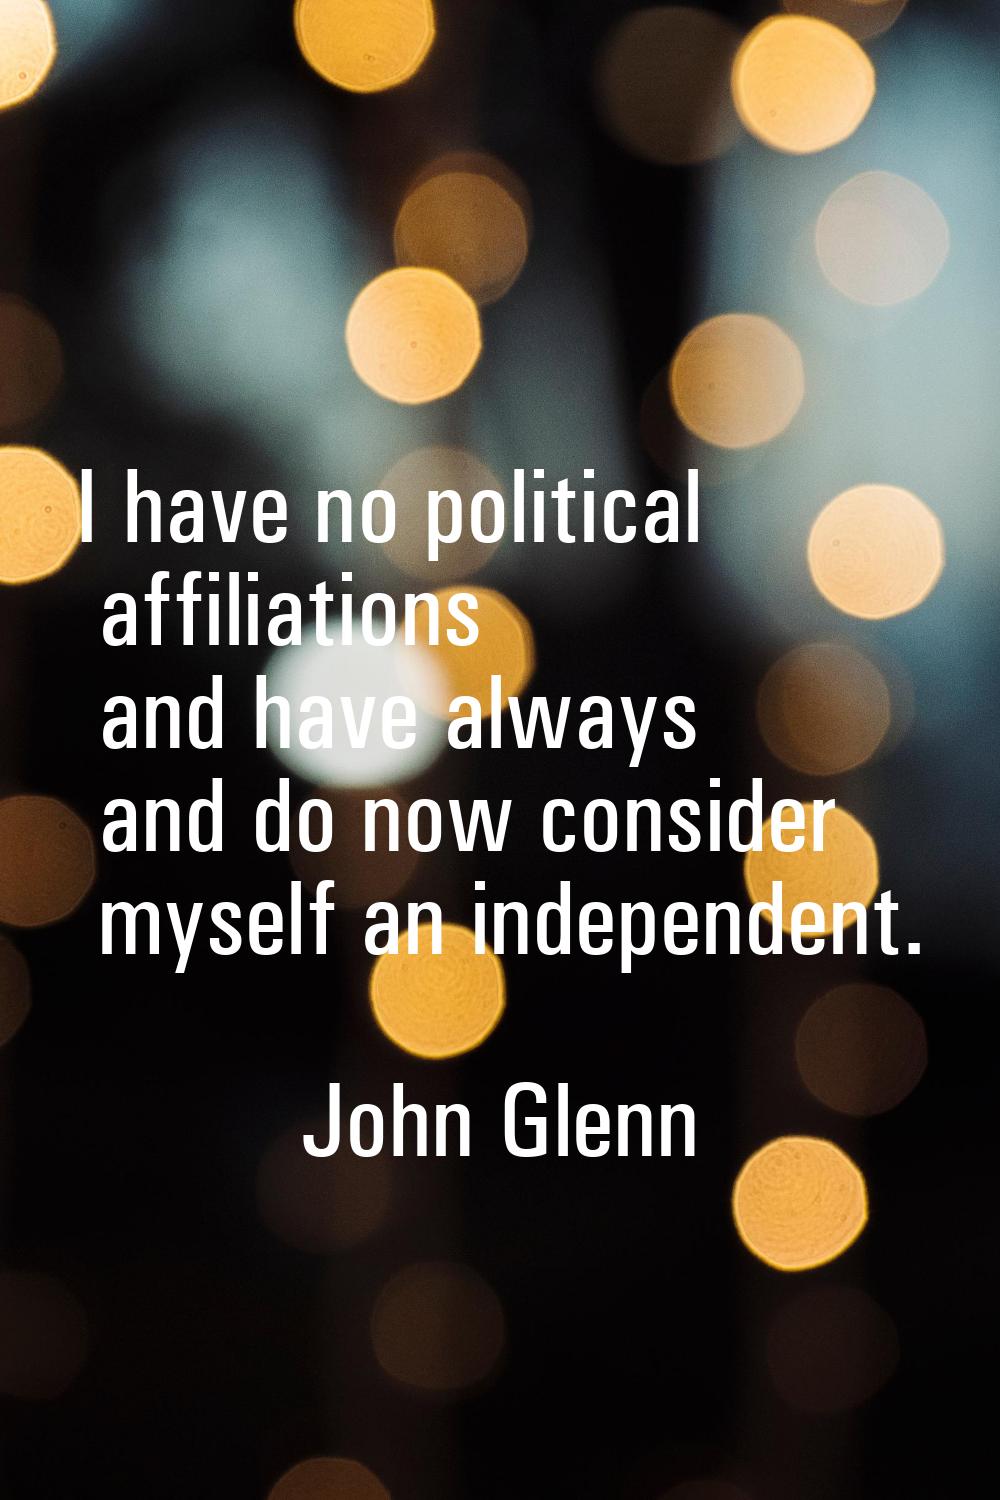 I have no political affiliations and have always and do now consider myself an independent.